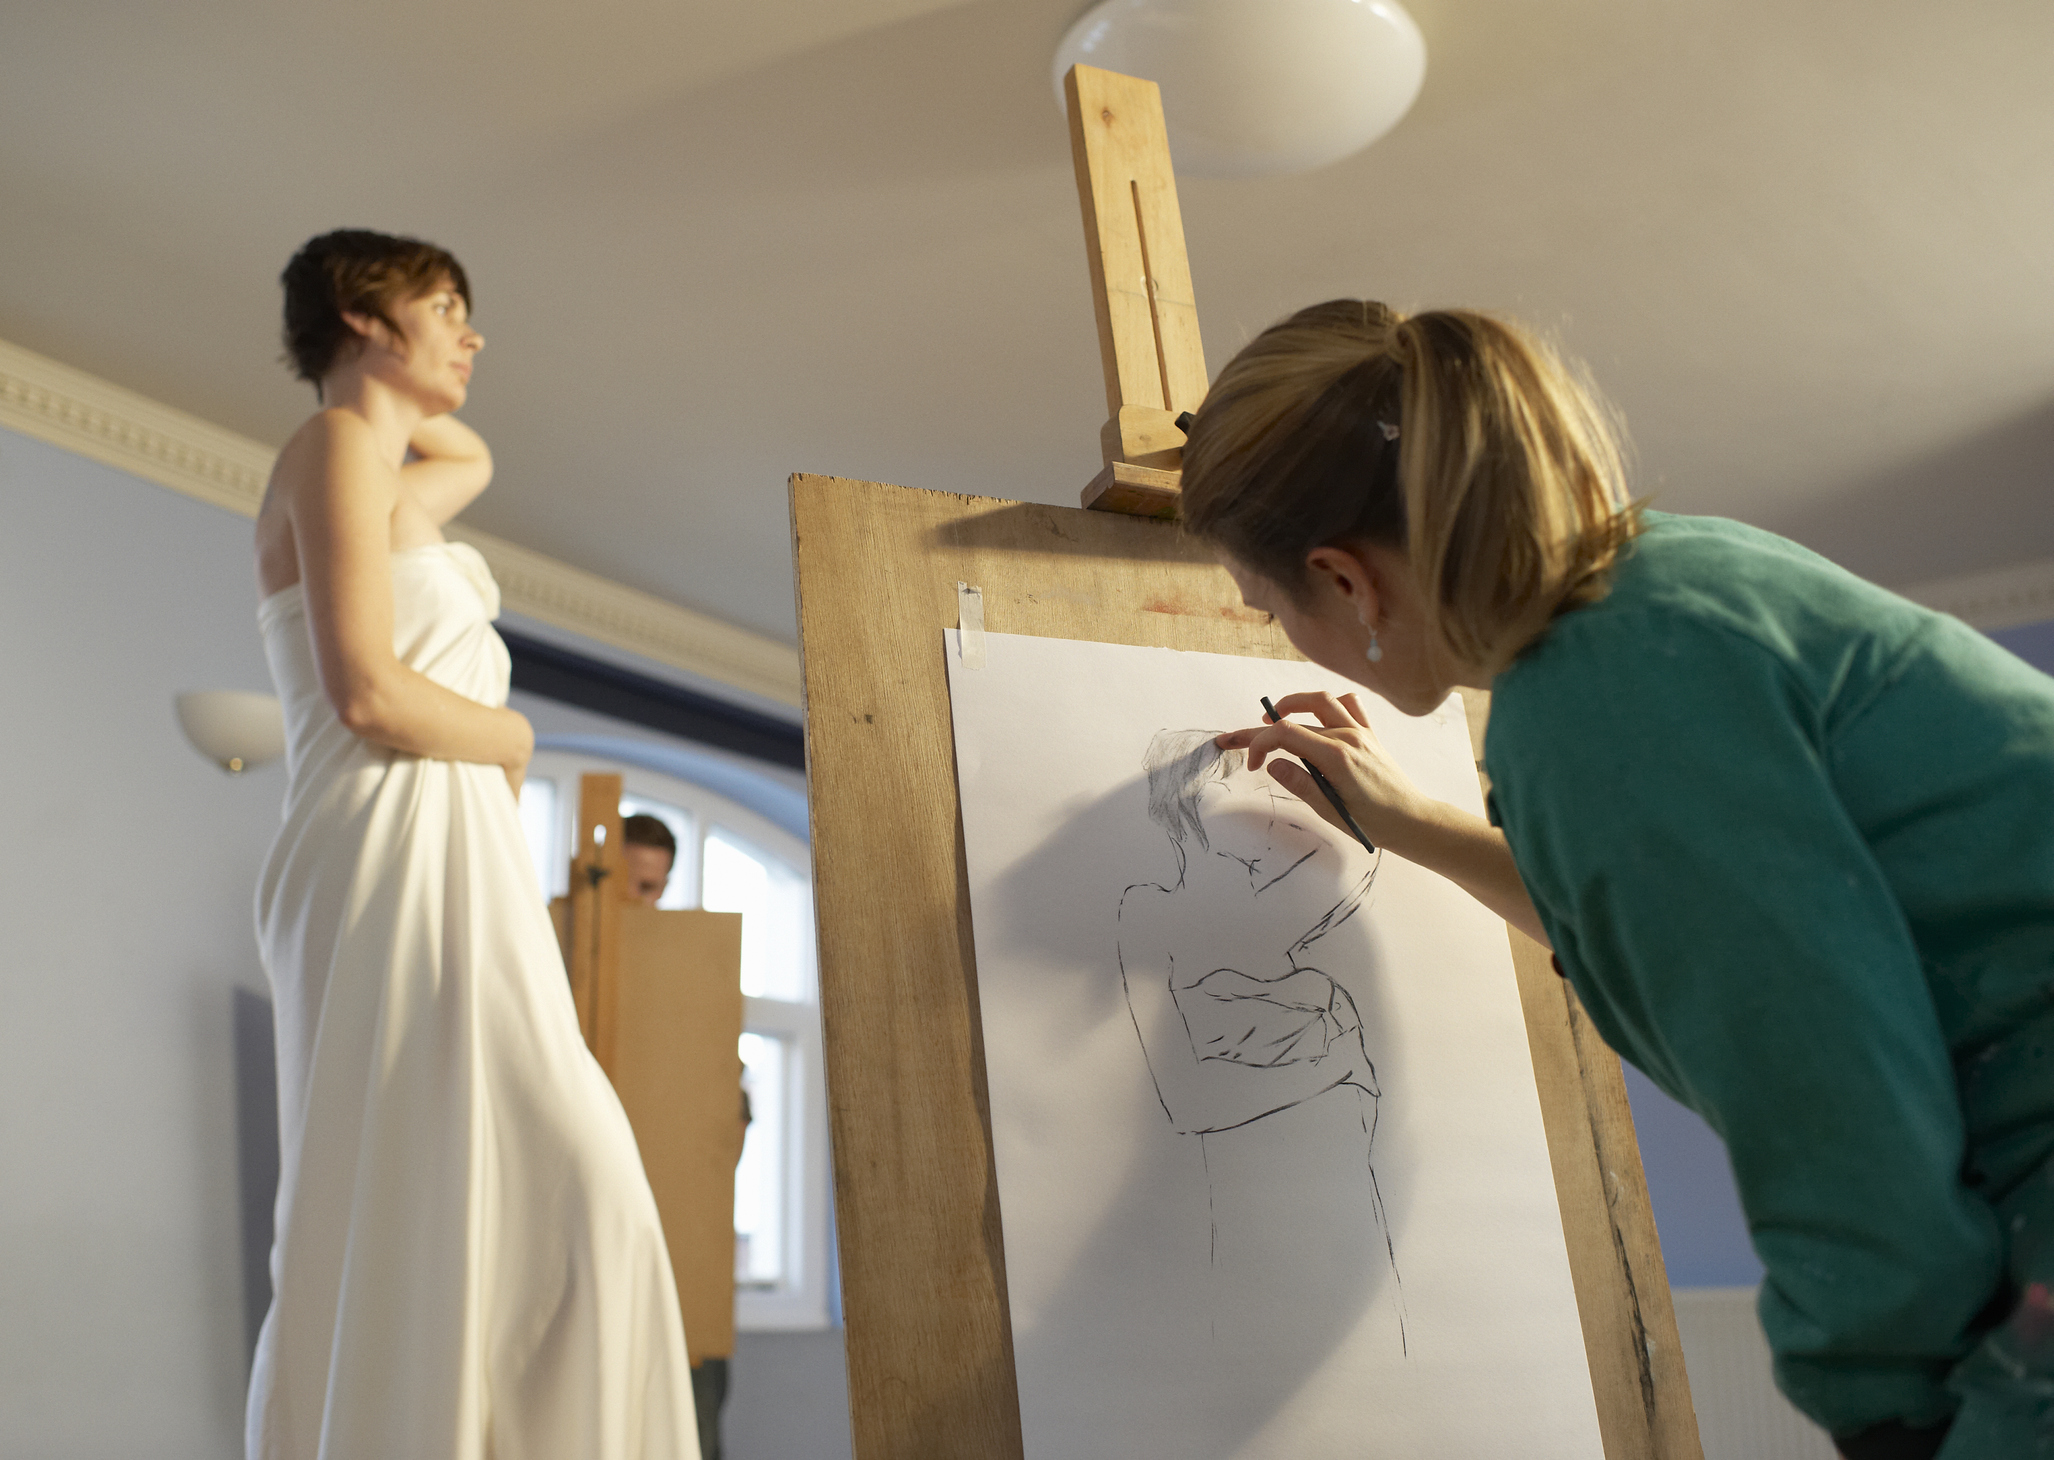 A woman at an easel working on a life-drawing.